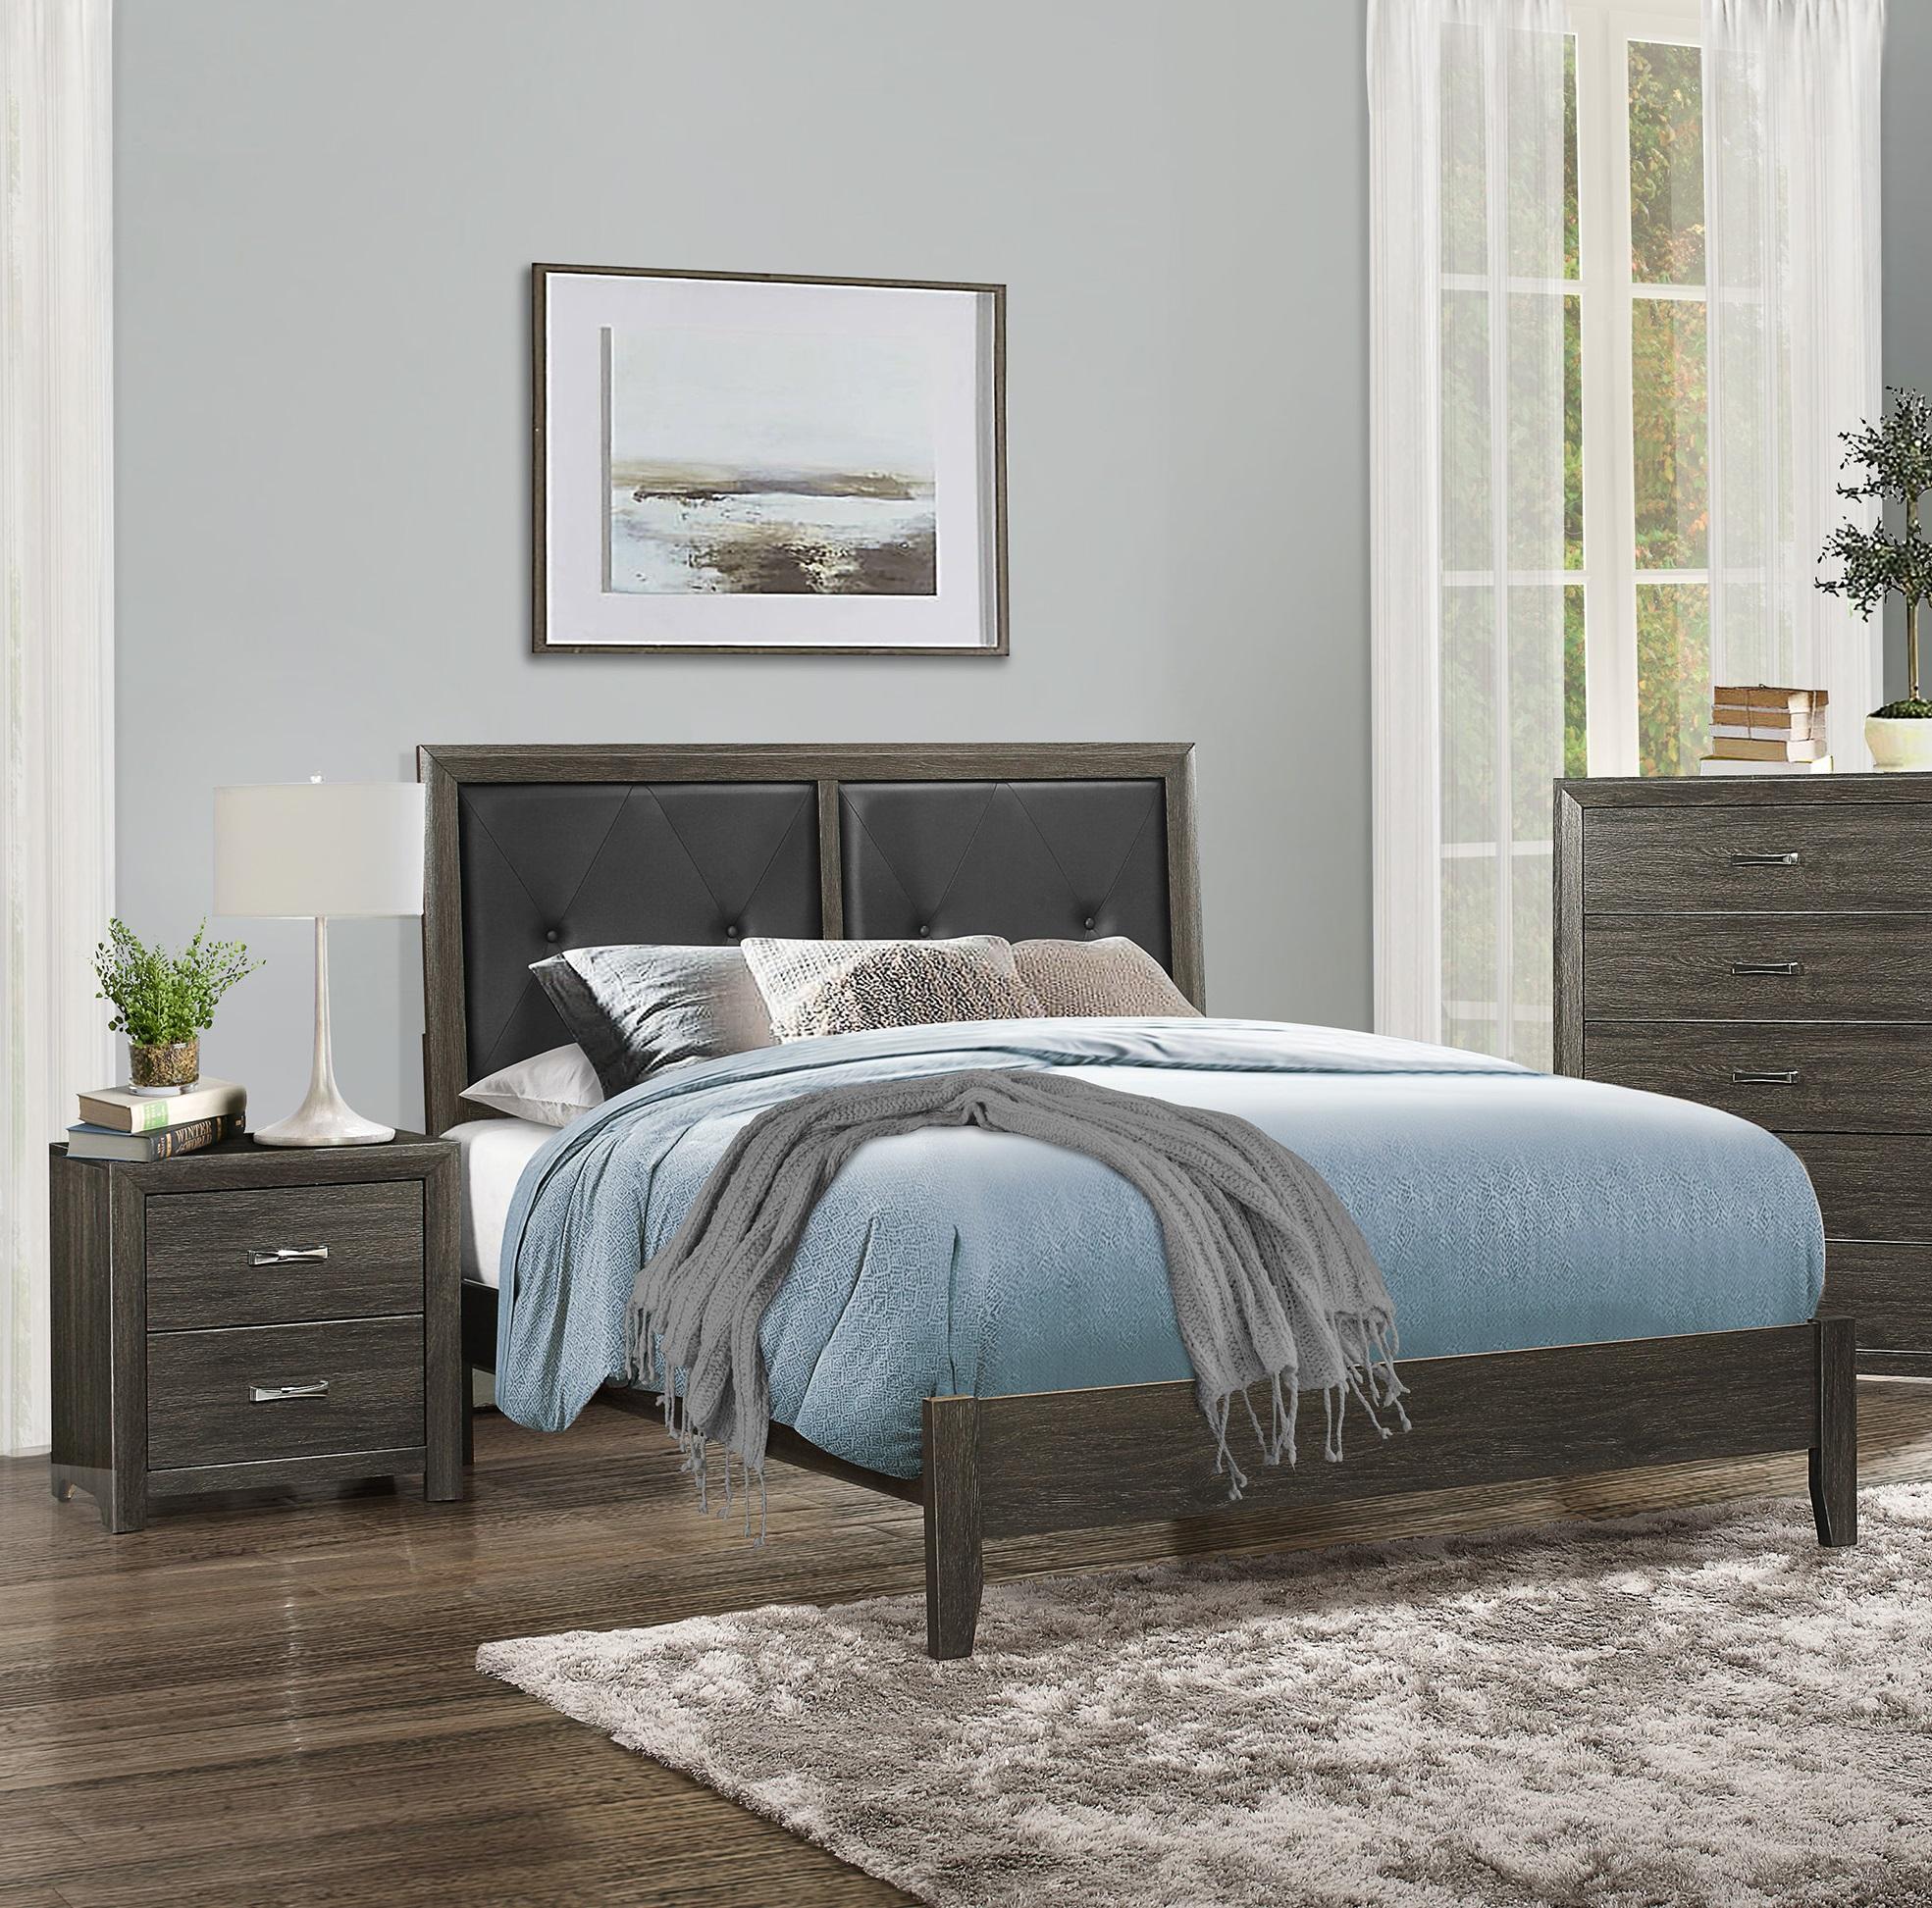 Contemporary Bedroom Set 2145KNP-1CK-3PC Edina 2145KNP-1CK-3PC in Dark Gray Faux Leather